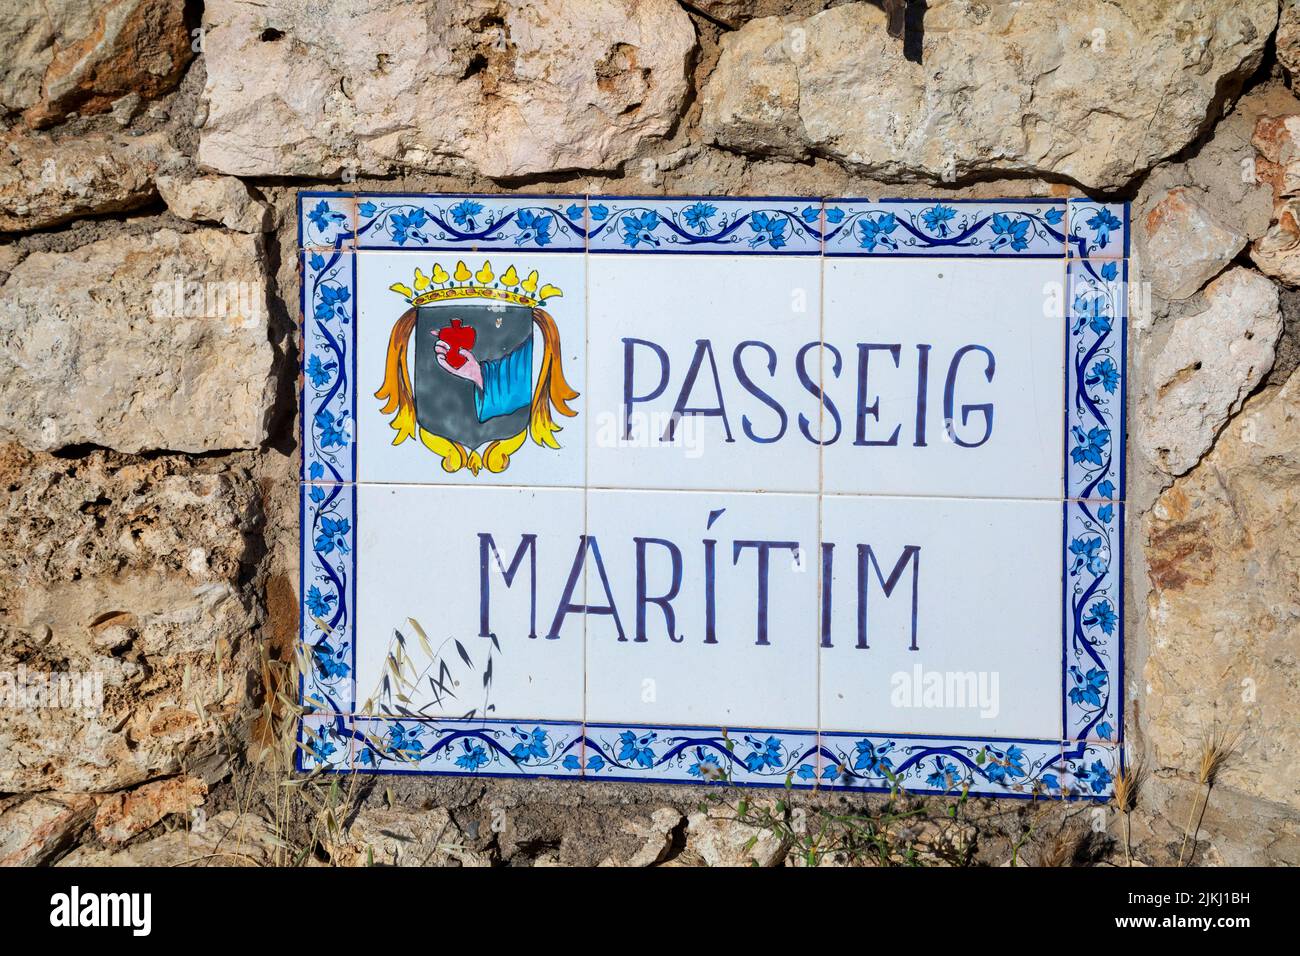 Spain, Balearic islands, Mallorca, district of Manacor, Calas de Mallorca. Written decorated on majolica, traditional to indicate the name of the streets to the Balearic Islands, Passeig Maritim Stock Photo